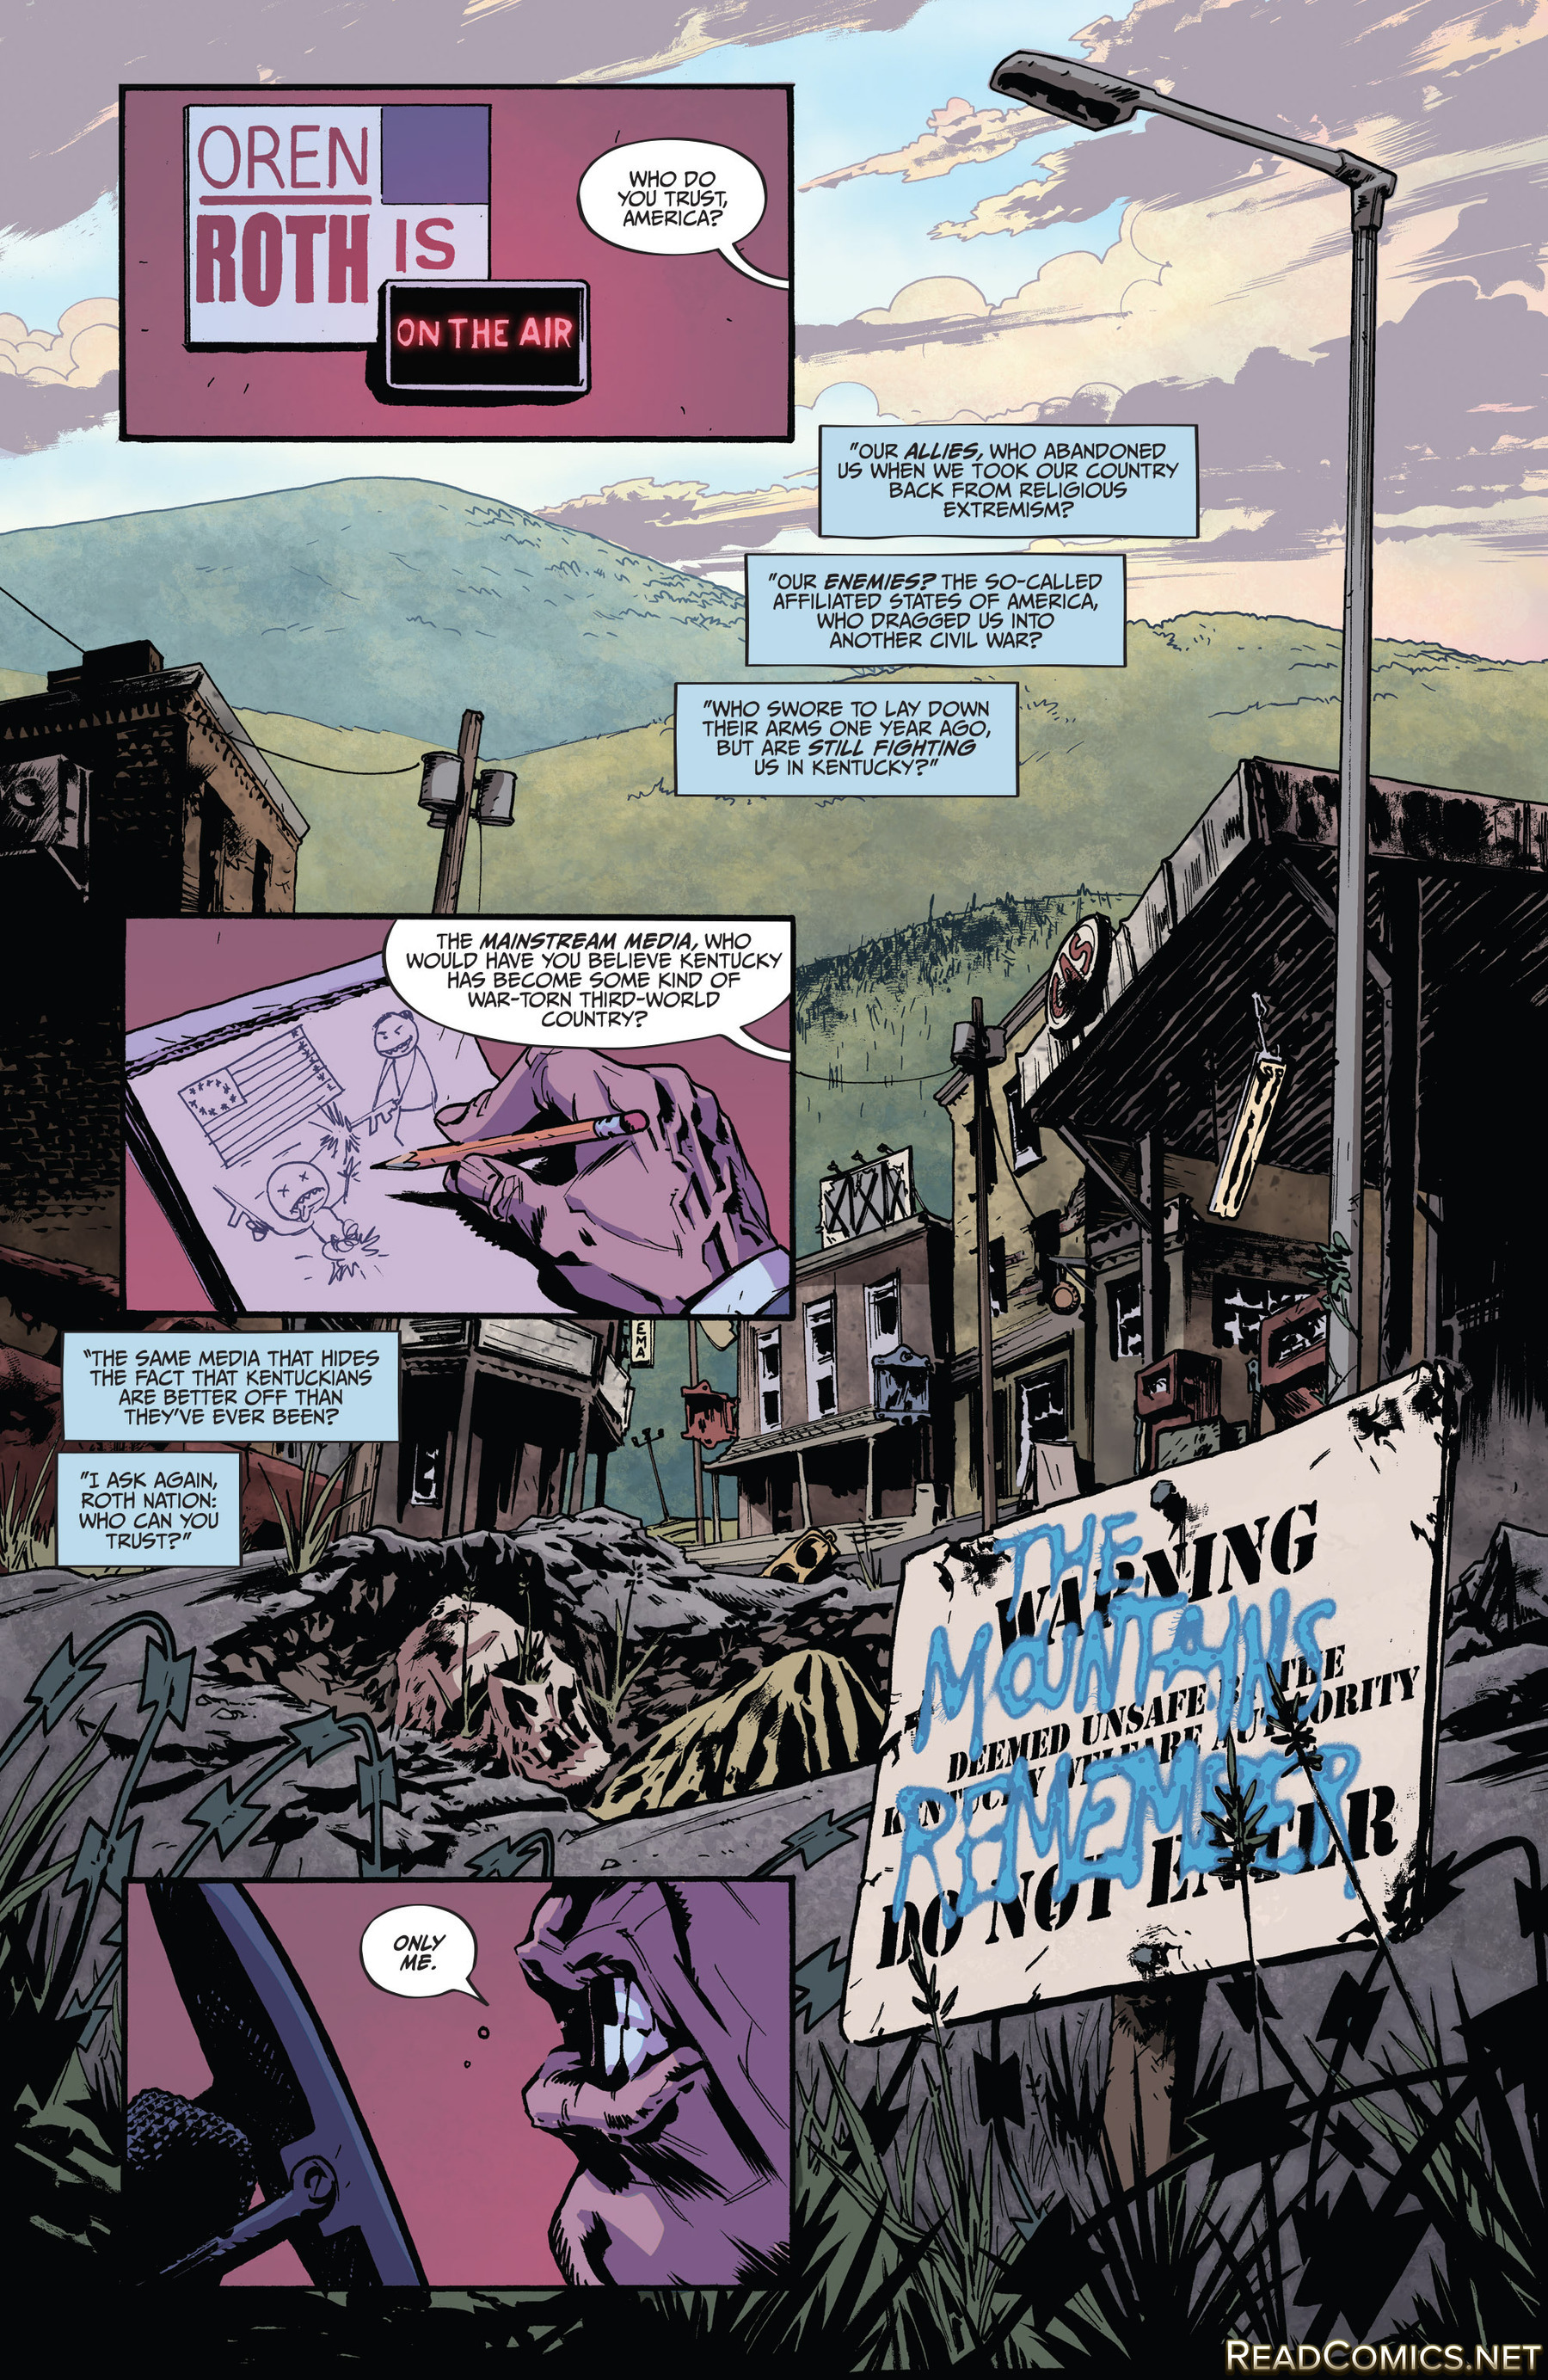 Warlords of Appalachia (2016-): Chapter 1 - Page 3